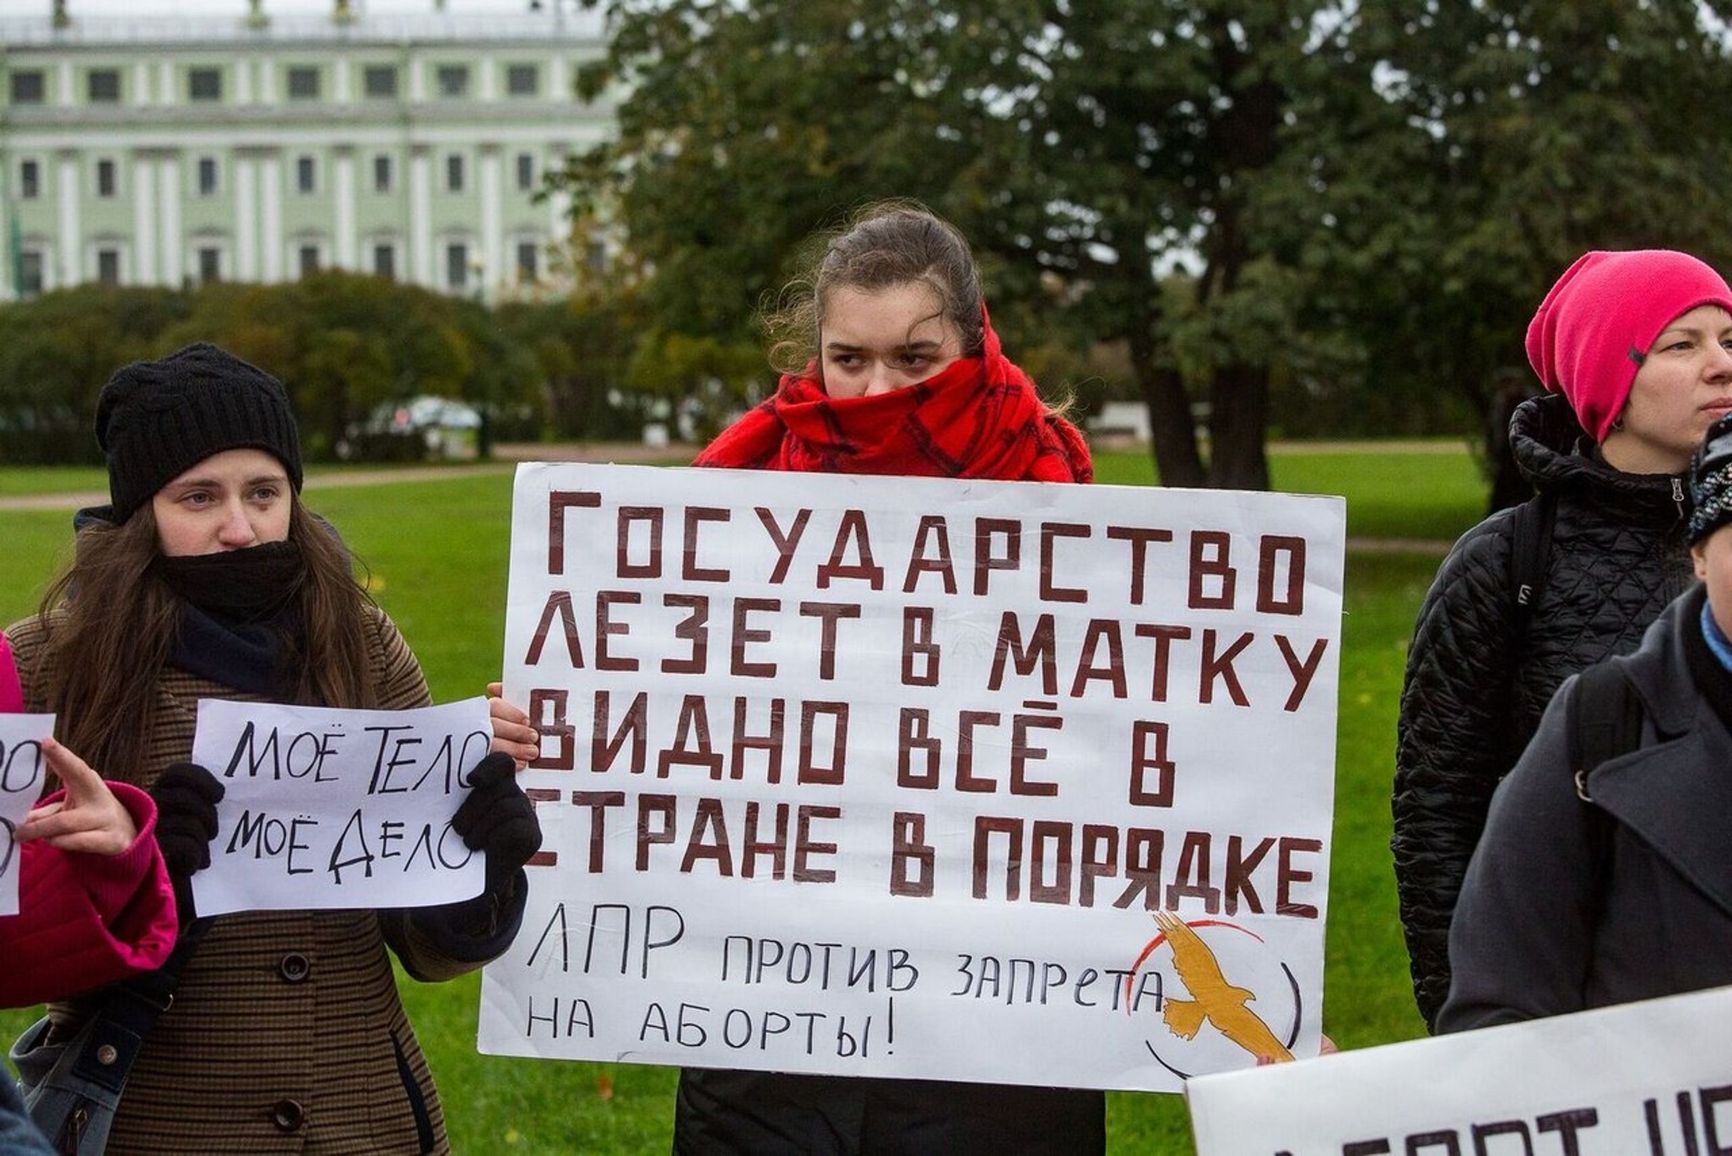 Protest against the withdrawal of abortion from the public healthcare system: "If the state is trying to get into your uterus, things must be going well in the country!"